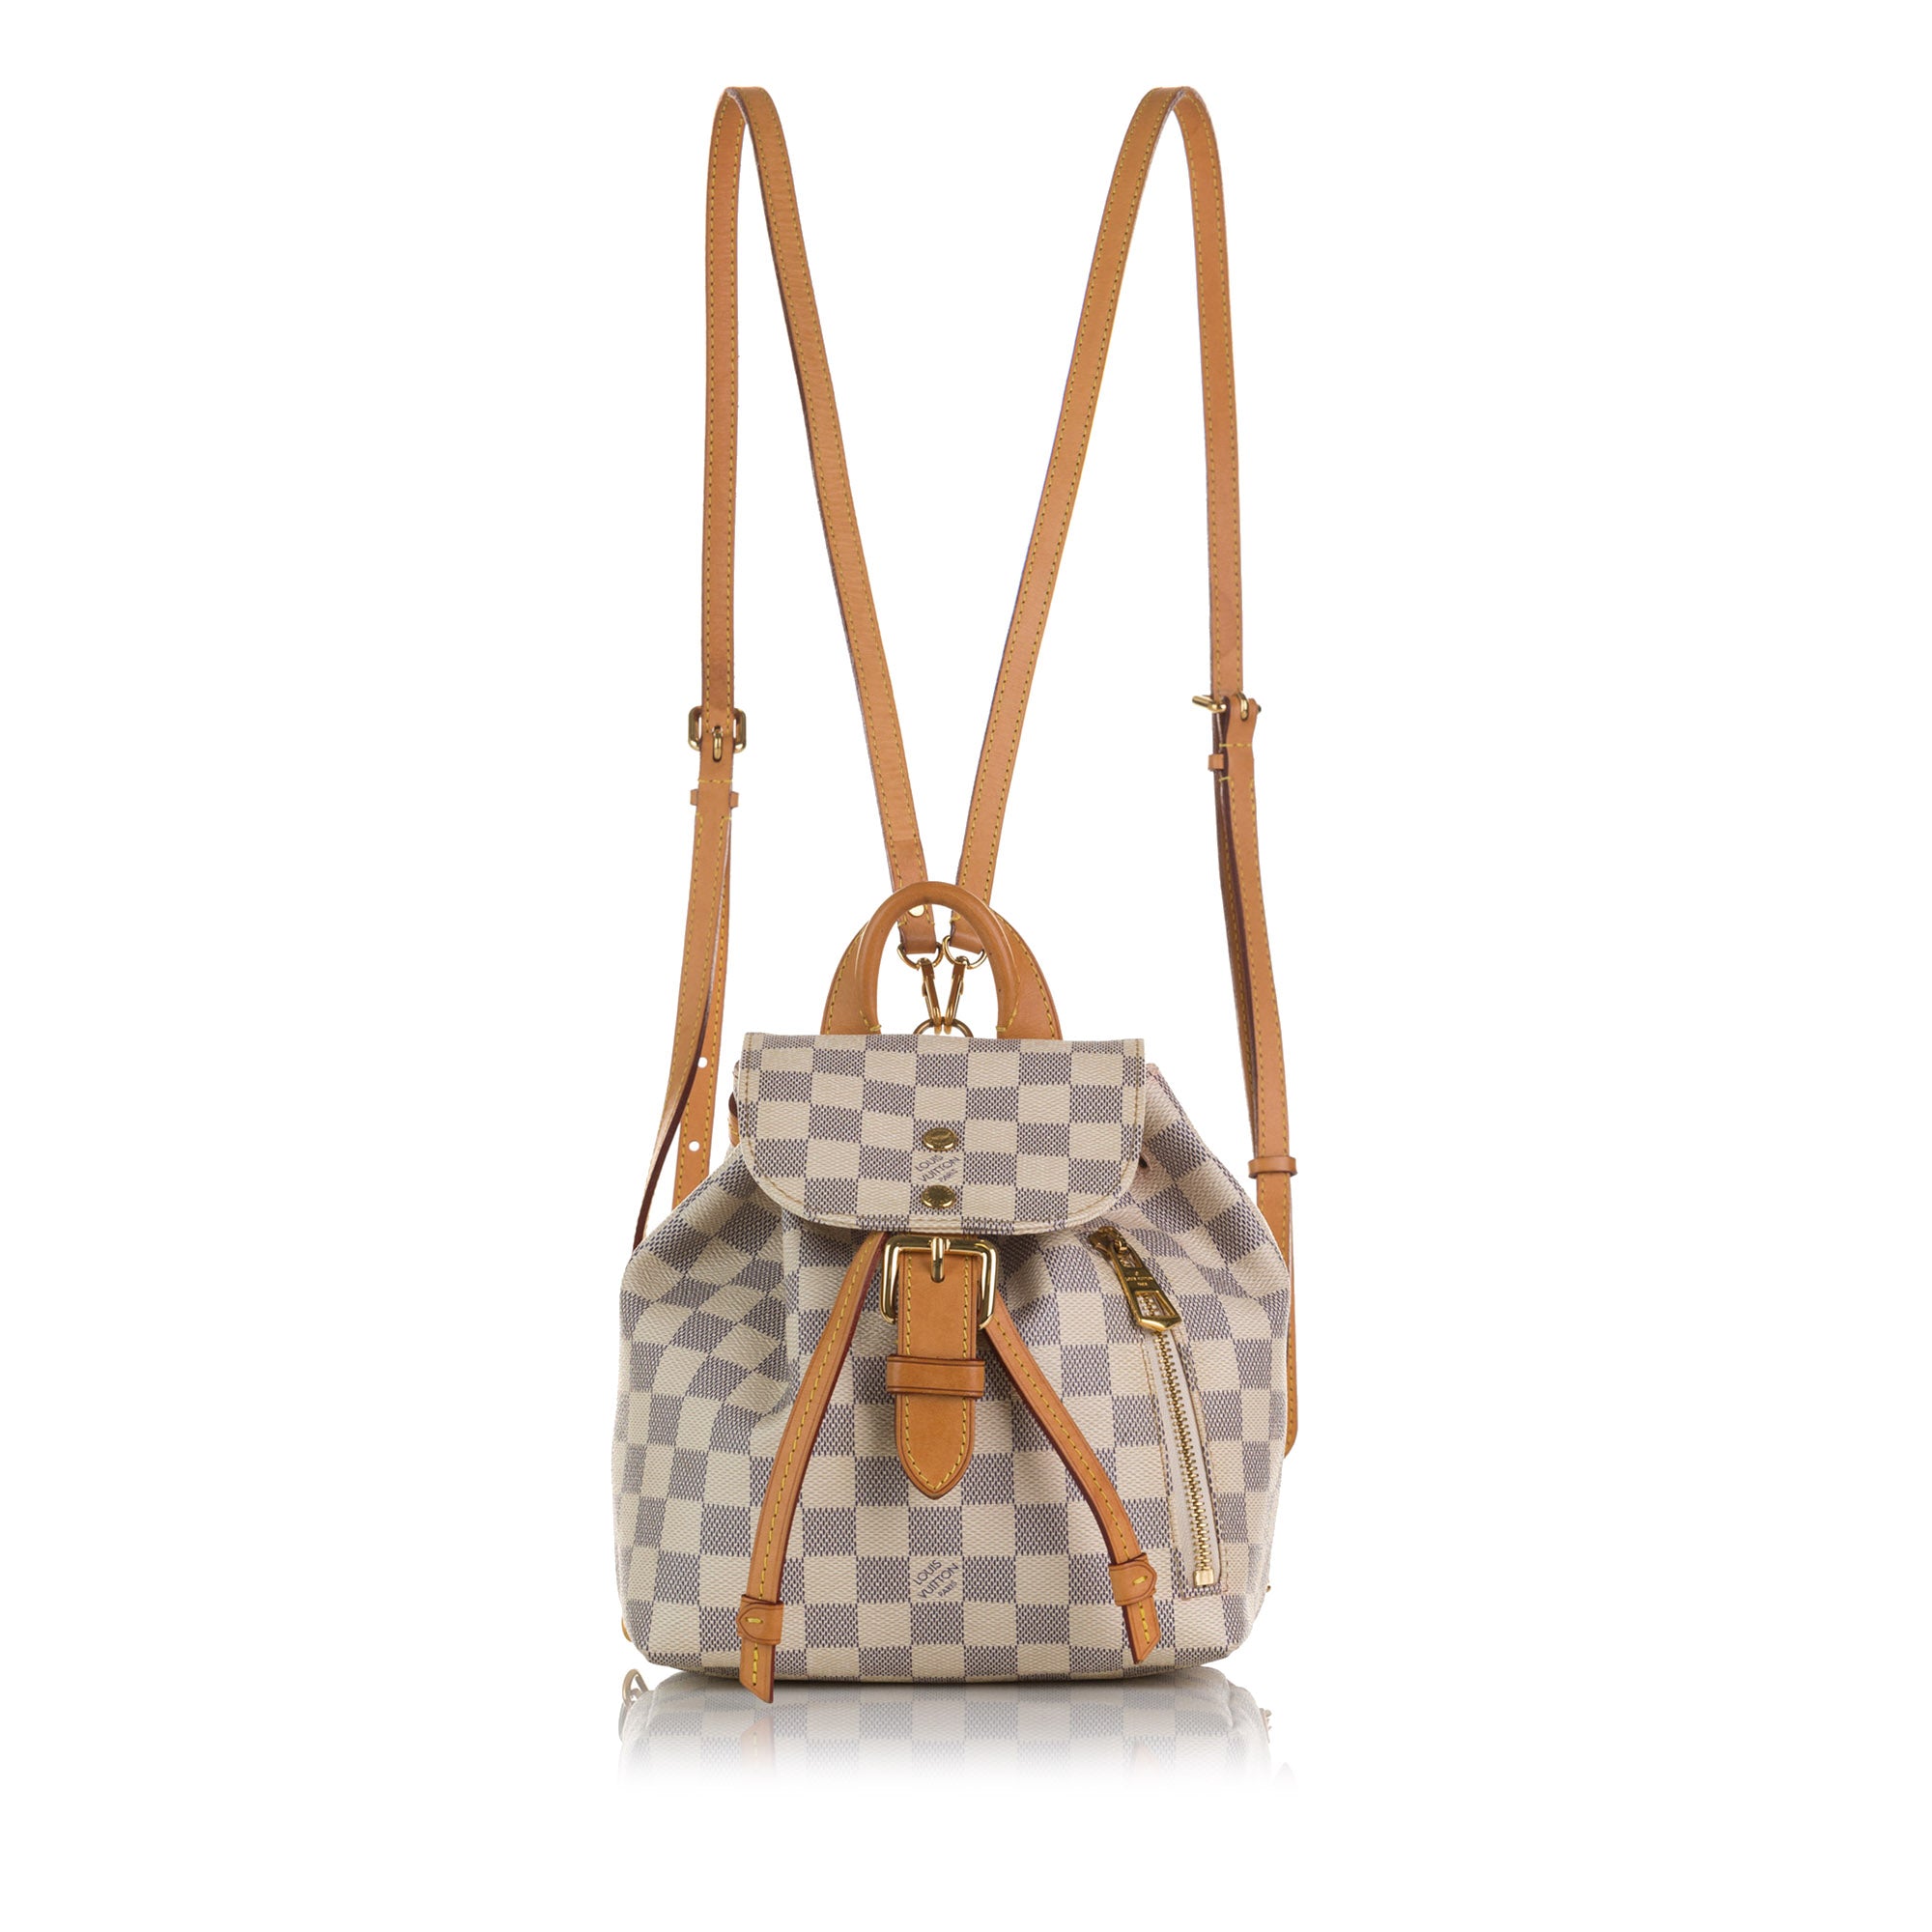 USED Louis Vuitton Damier Azur Canvas with Braided Handle NeoNoe BB Bag  AUTHENTI